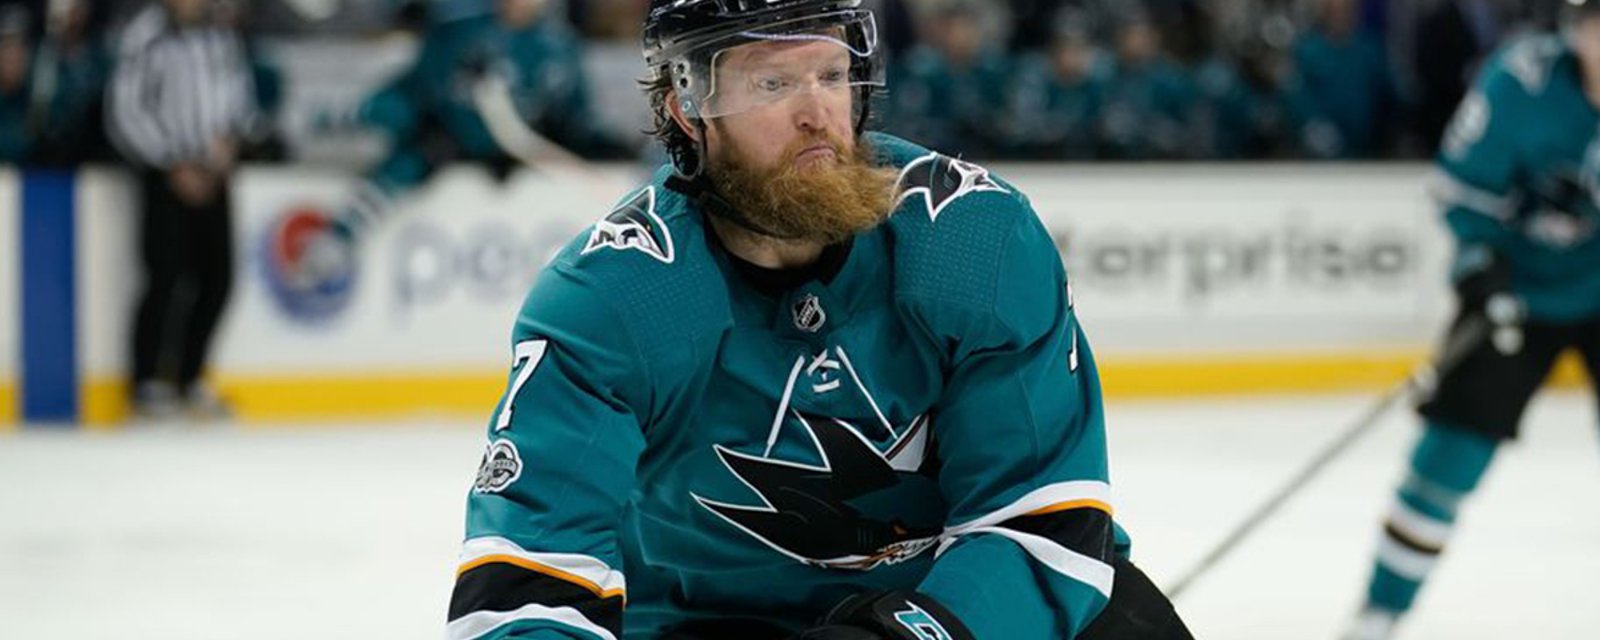 Breaking: Sharks assign Martin to AHL